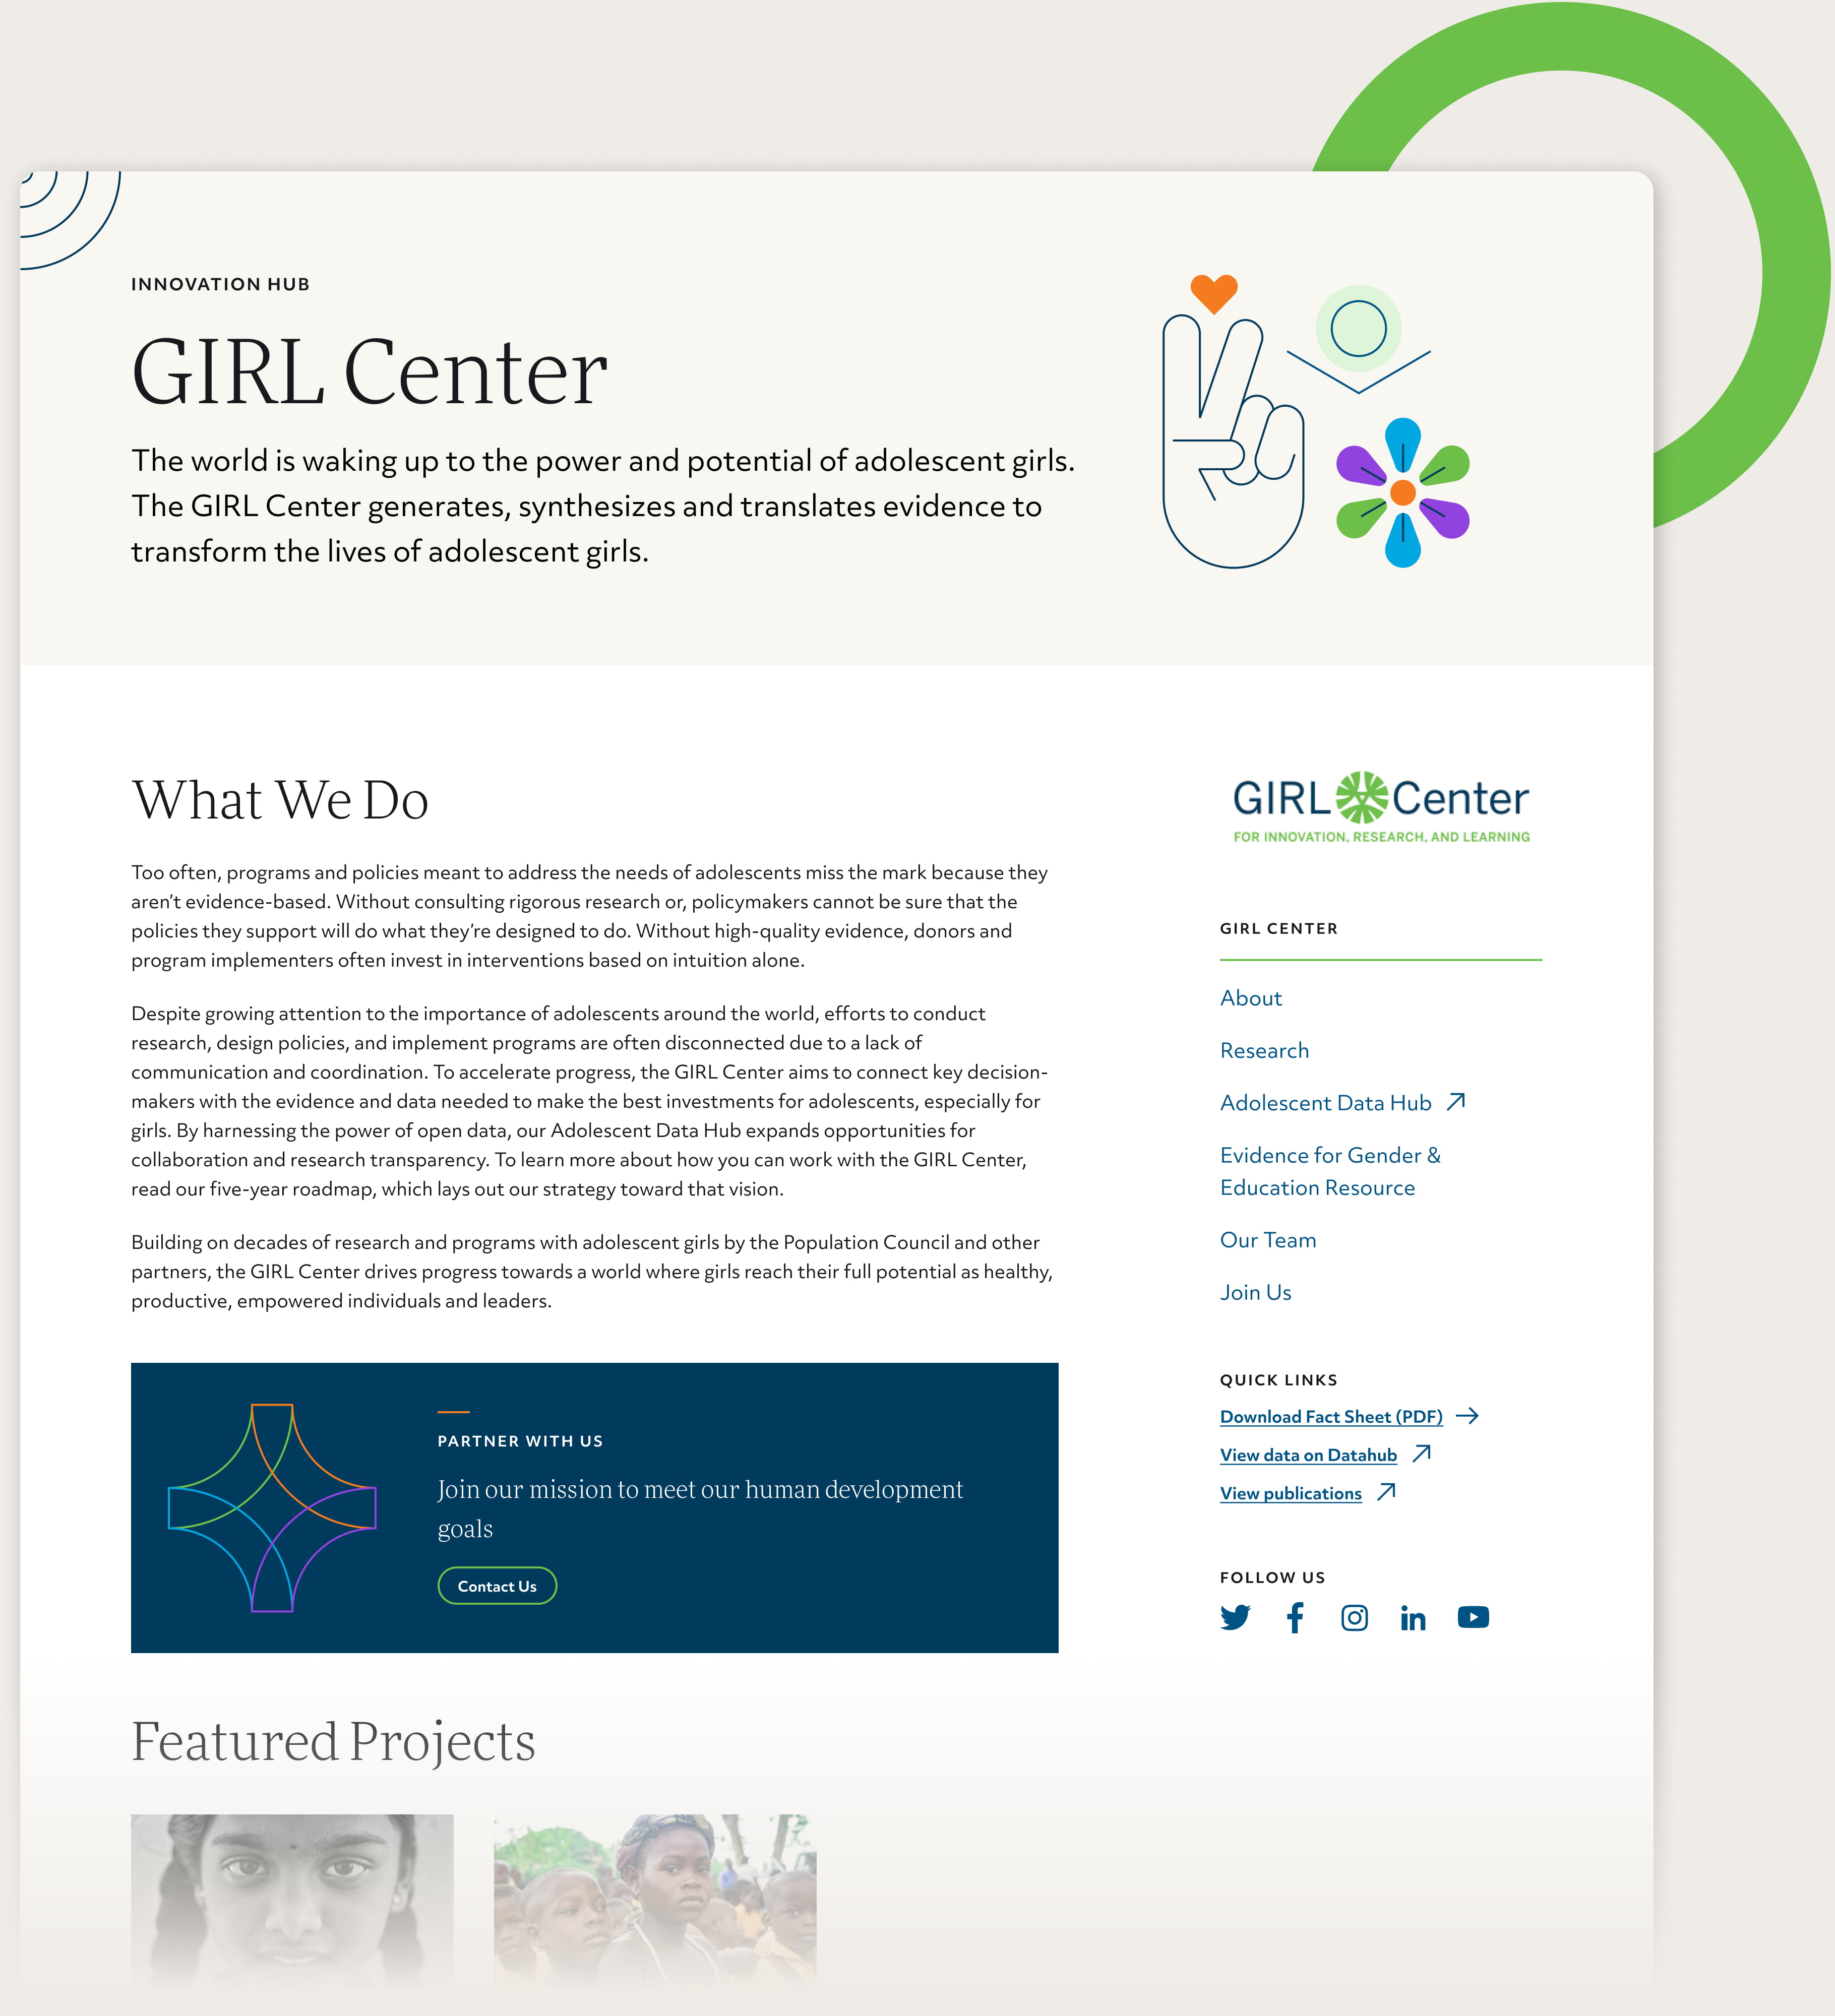 Example of an Innovation Hub landing page called GIRL Center